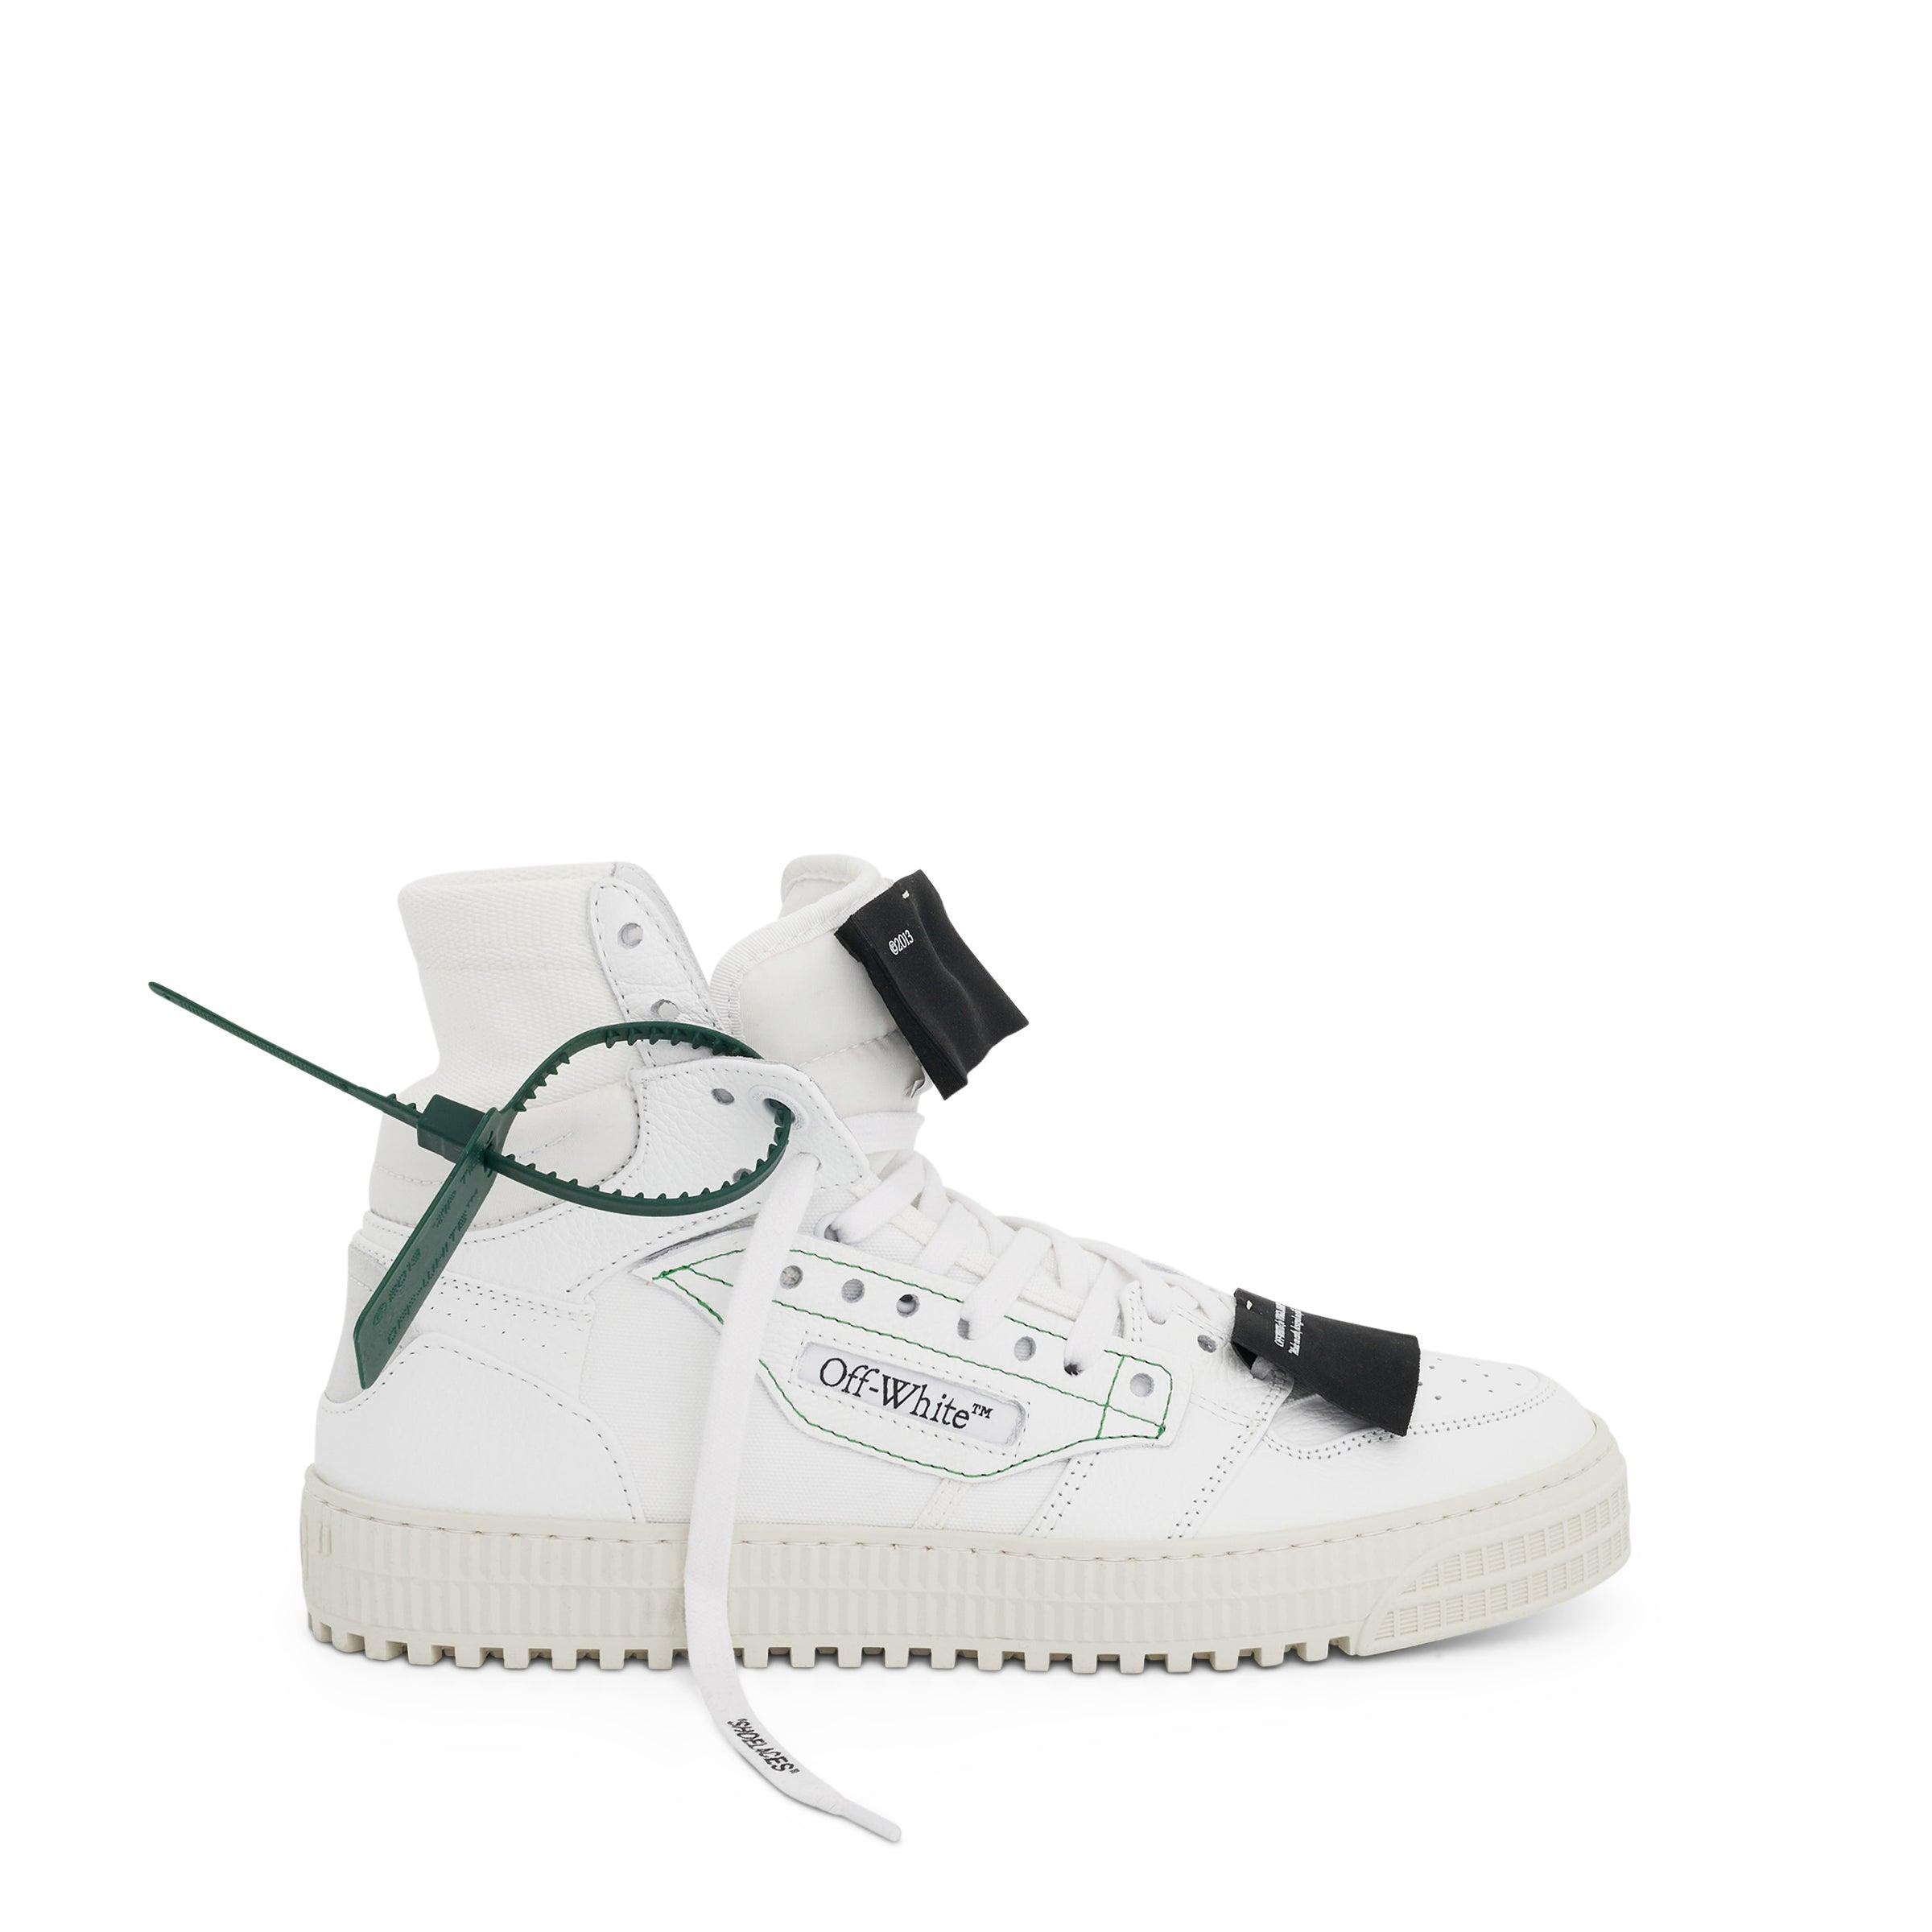 OFF-WHITE C/O VIRGIL ABLOH Low 3.0 White // High-top sneakers